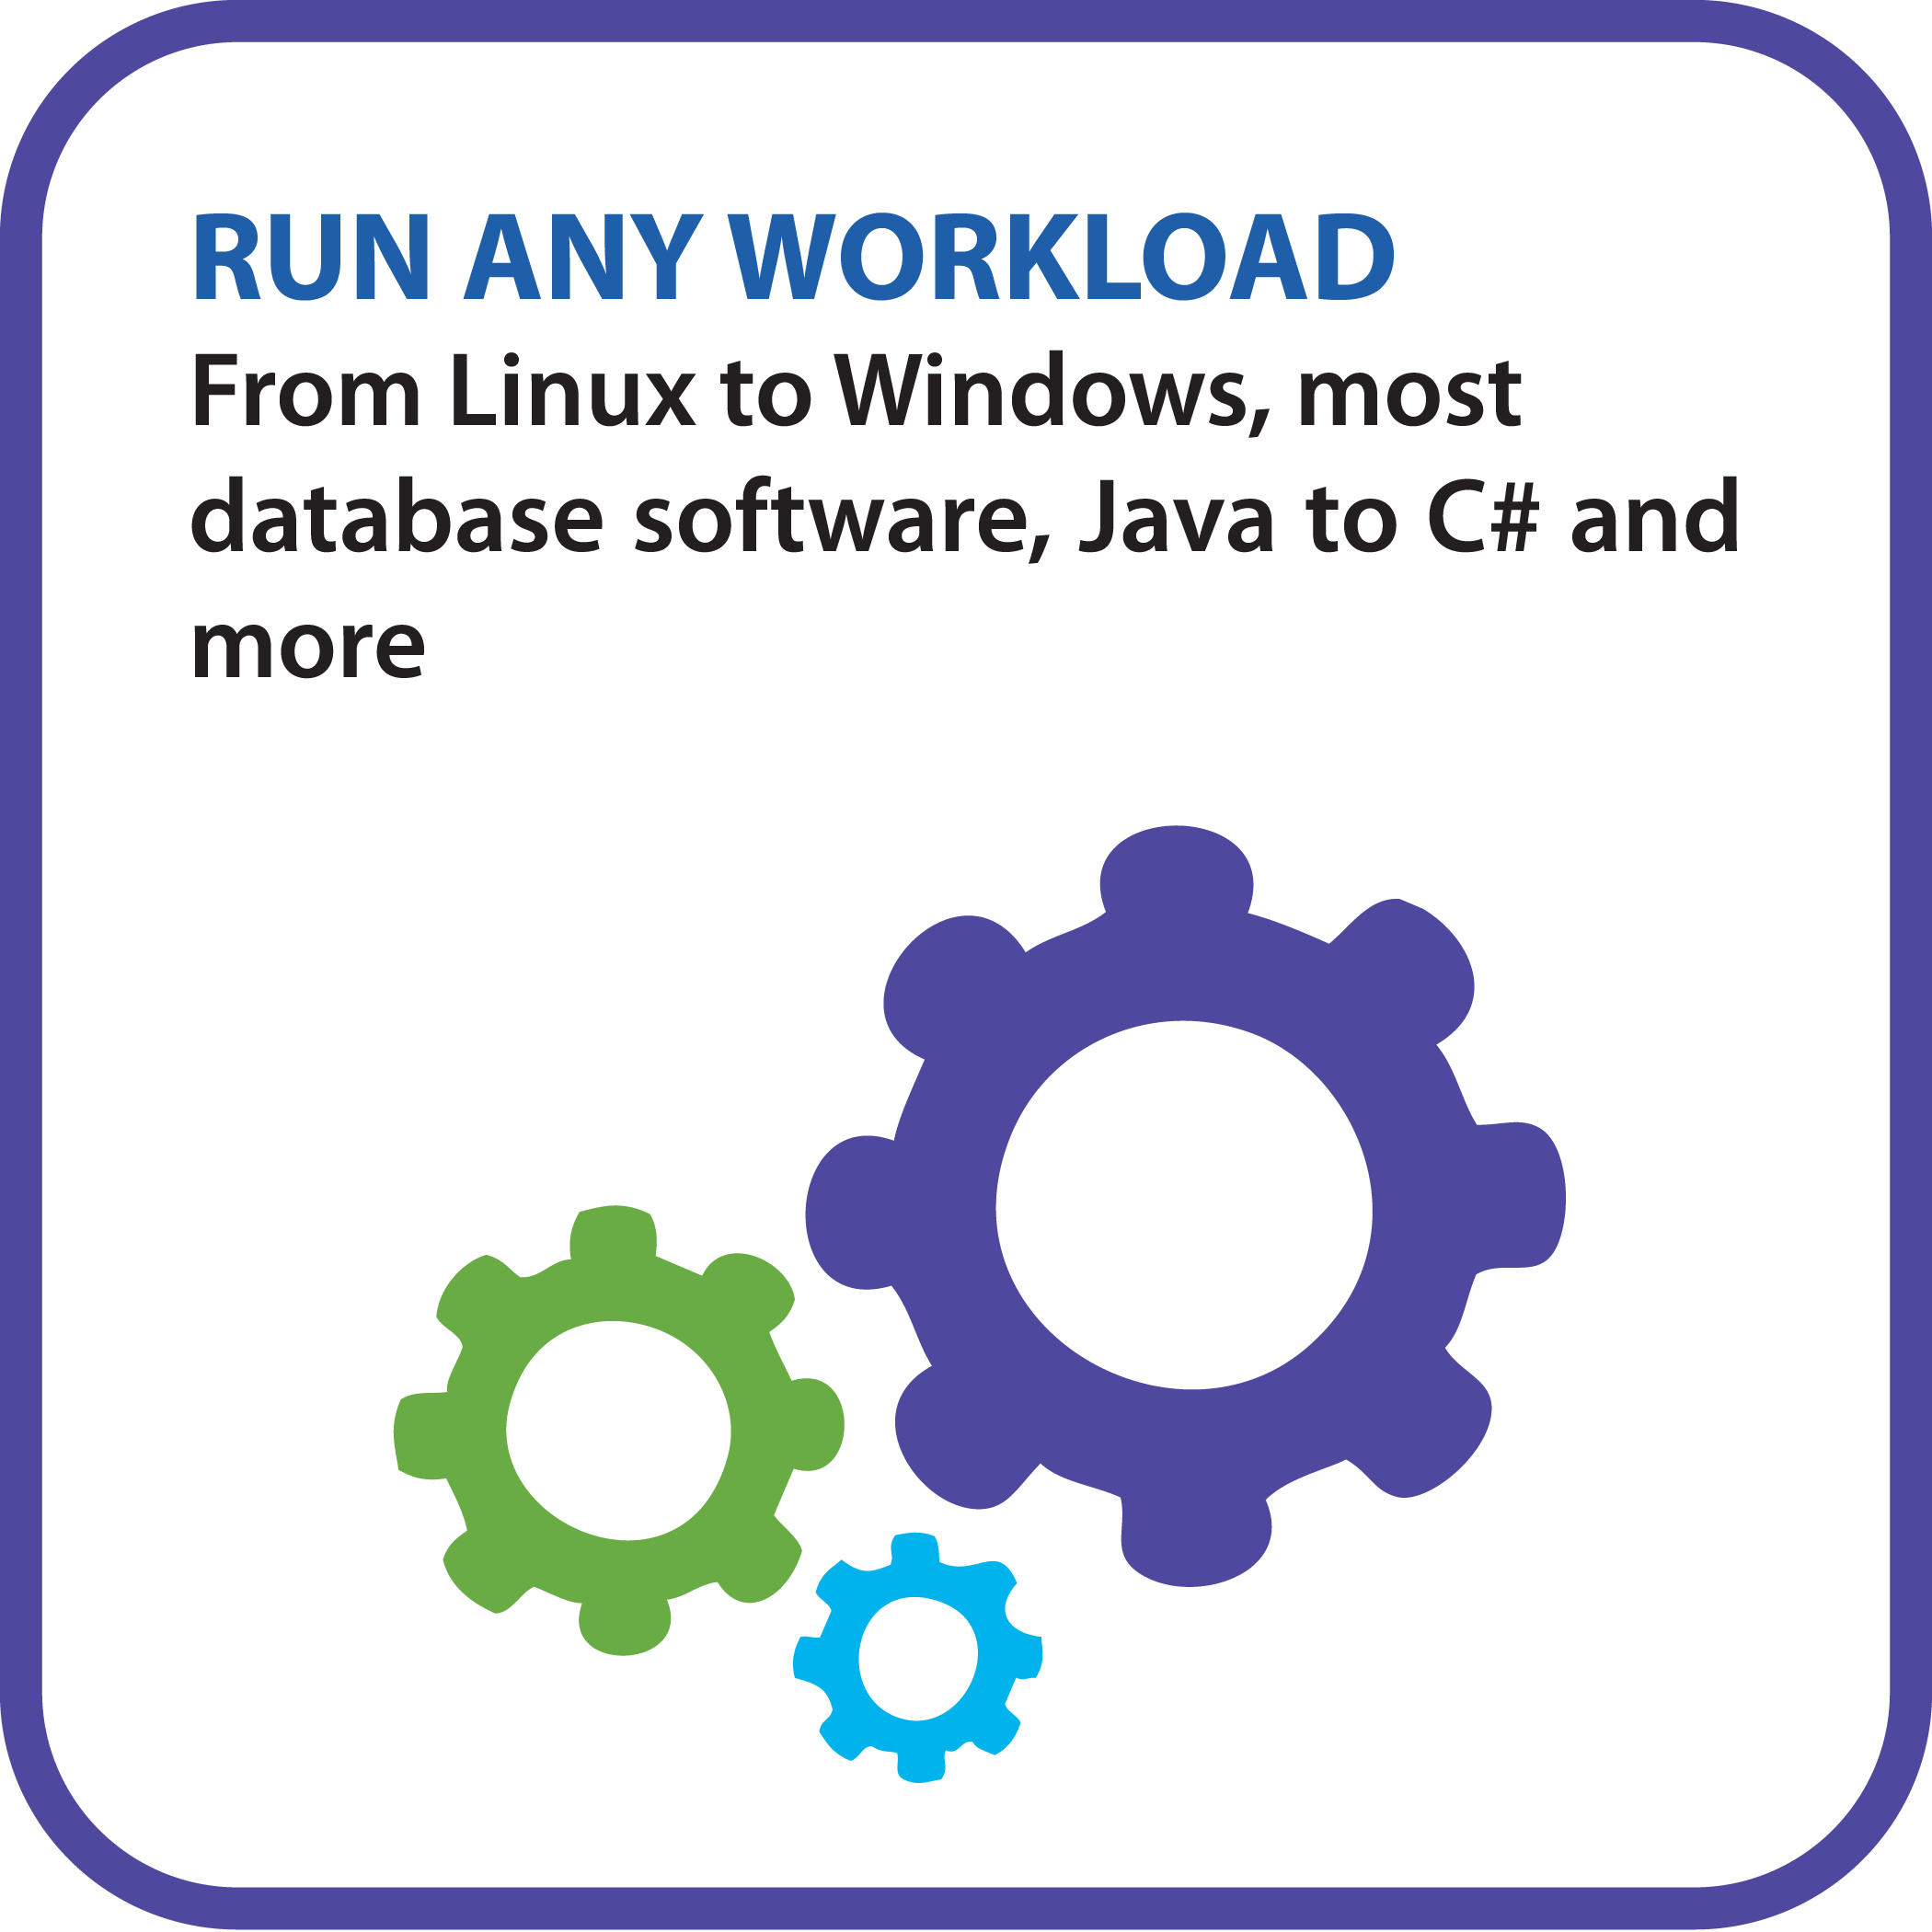 Run any workload